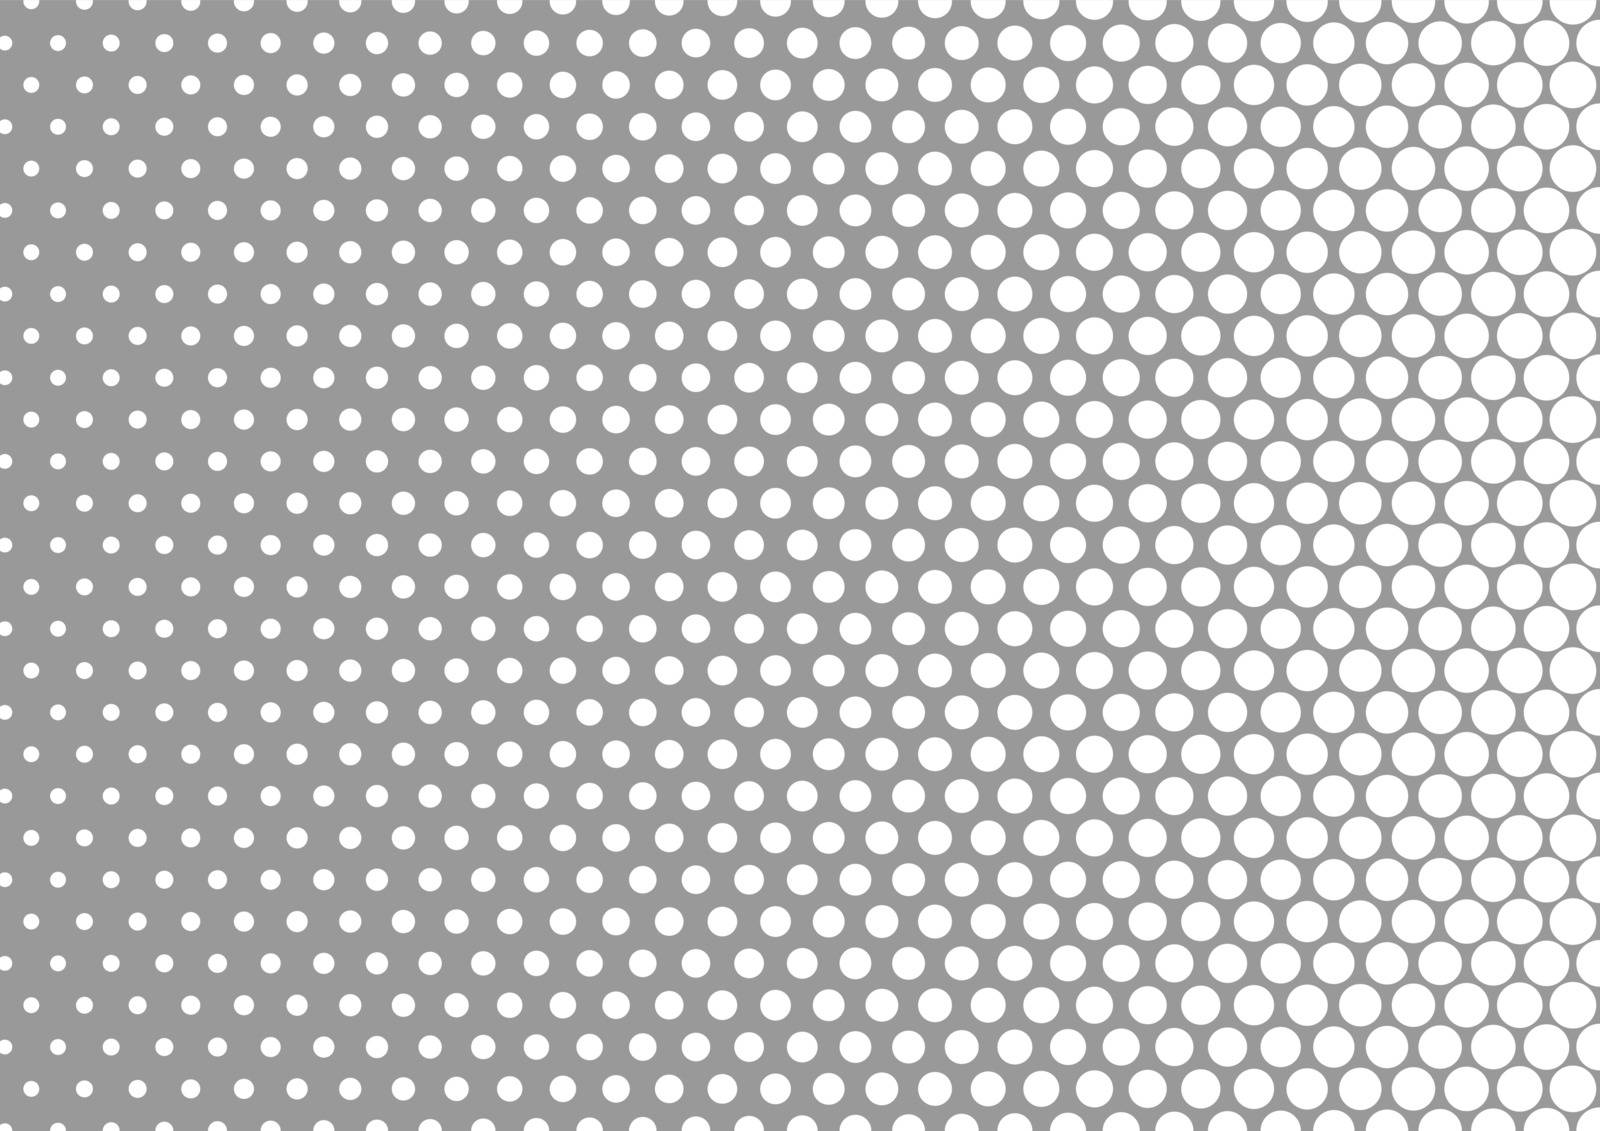 Dotted Texture - Abstract Background Illustration, Vector